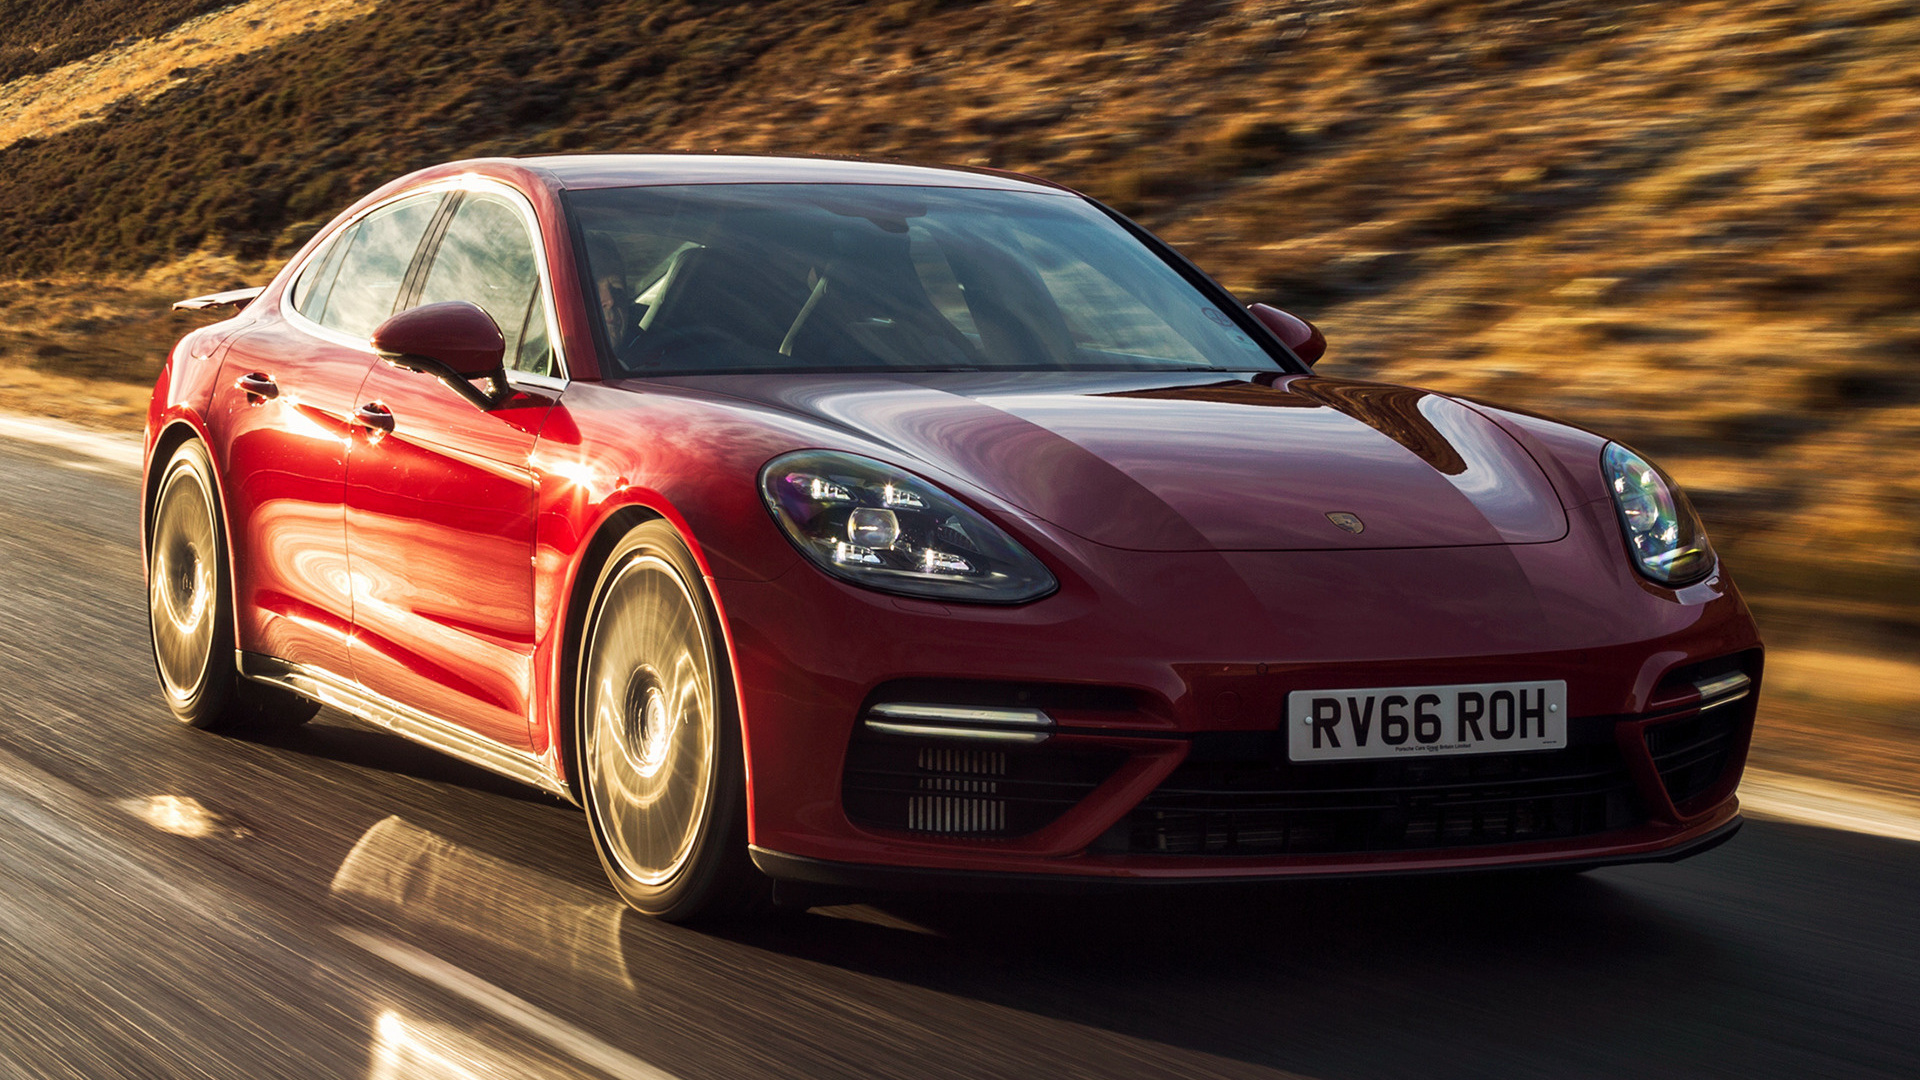 2016 Porsche Panamera Turbo (UK) - Wallpapers and HD Images | Car Pixel